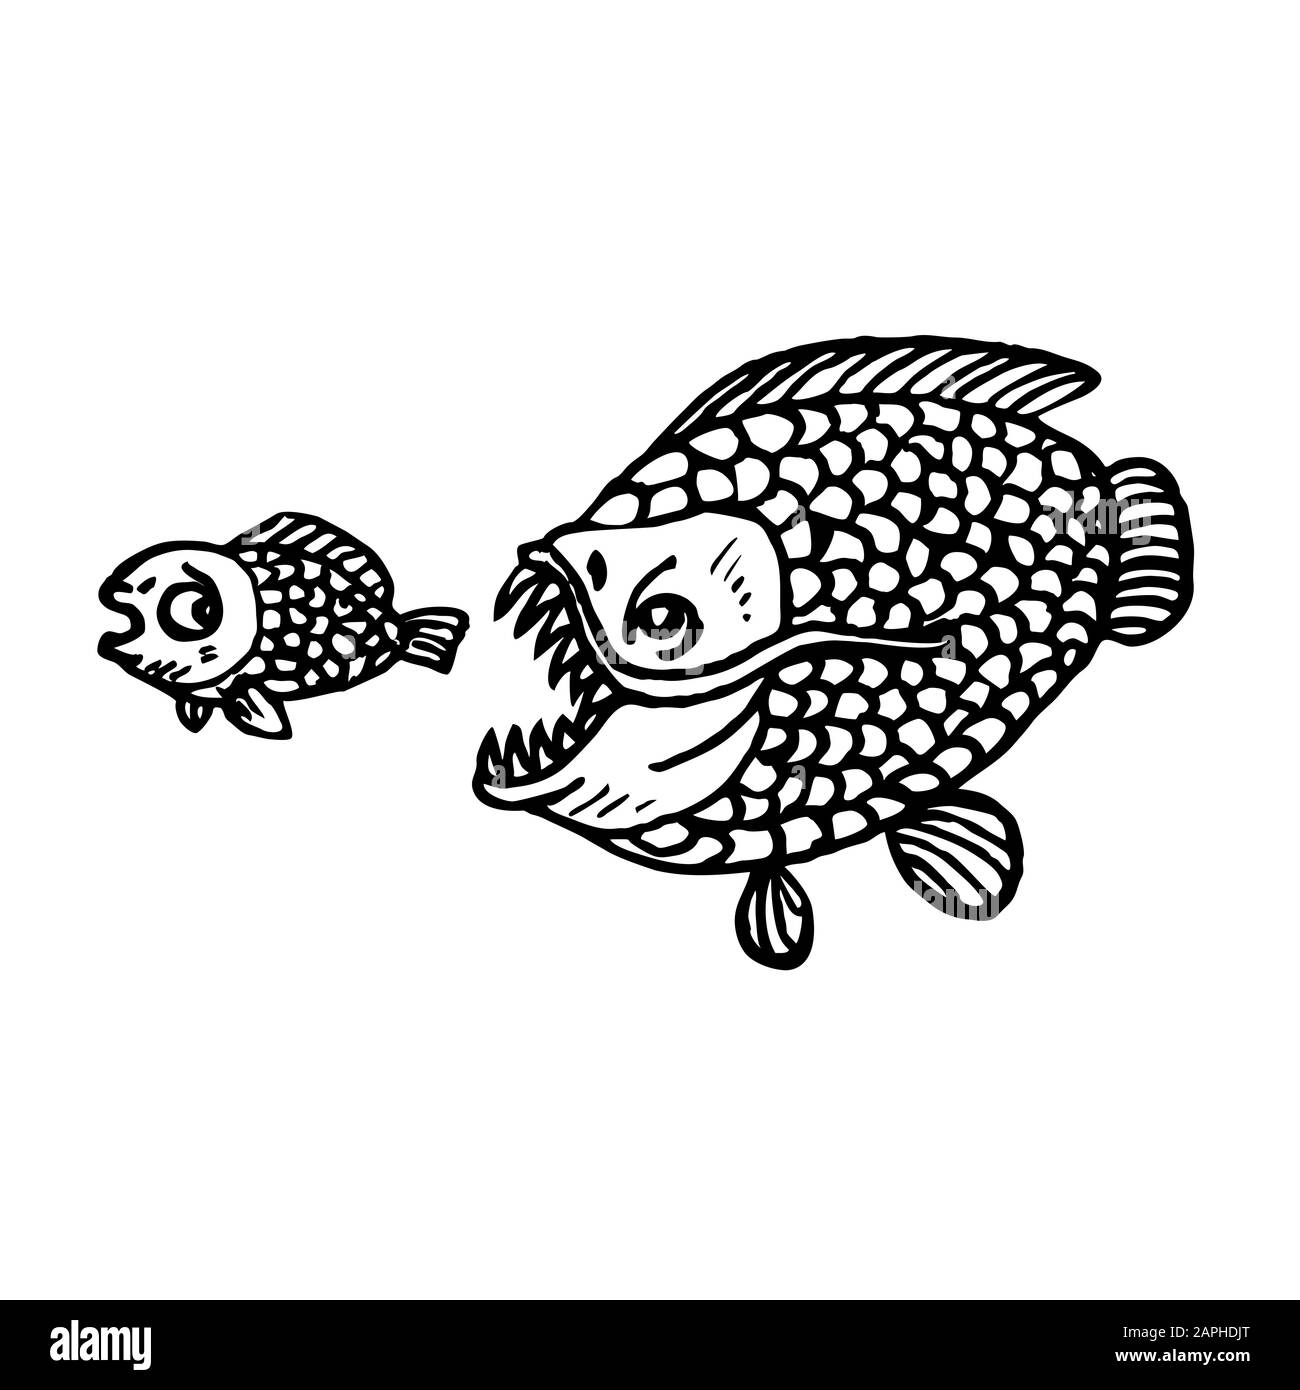 Funny piranha fish cartoon character trying to catch small fish, hand drawn  doodle sketch, isolated outline illustration Stock Photo - Alamy